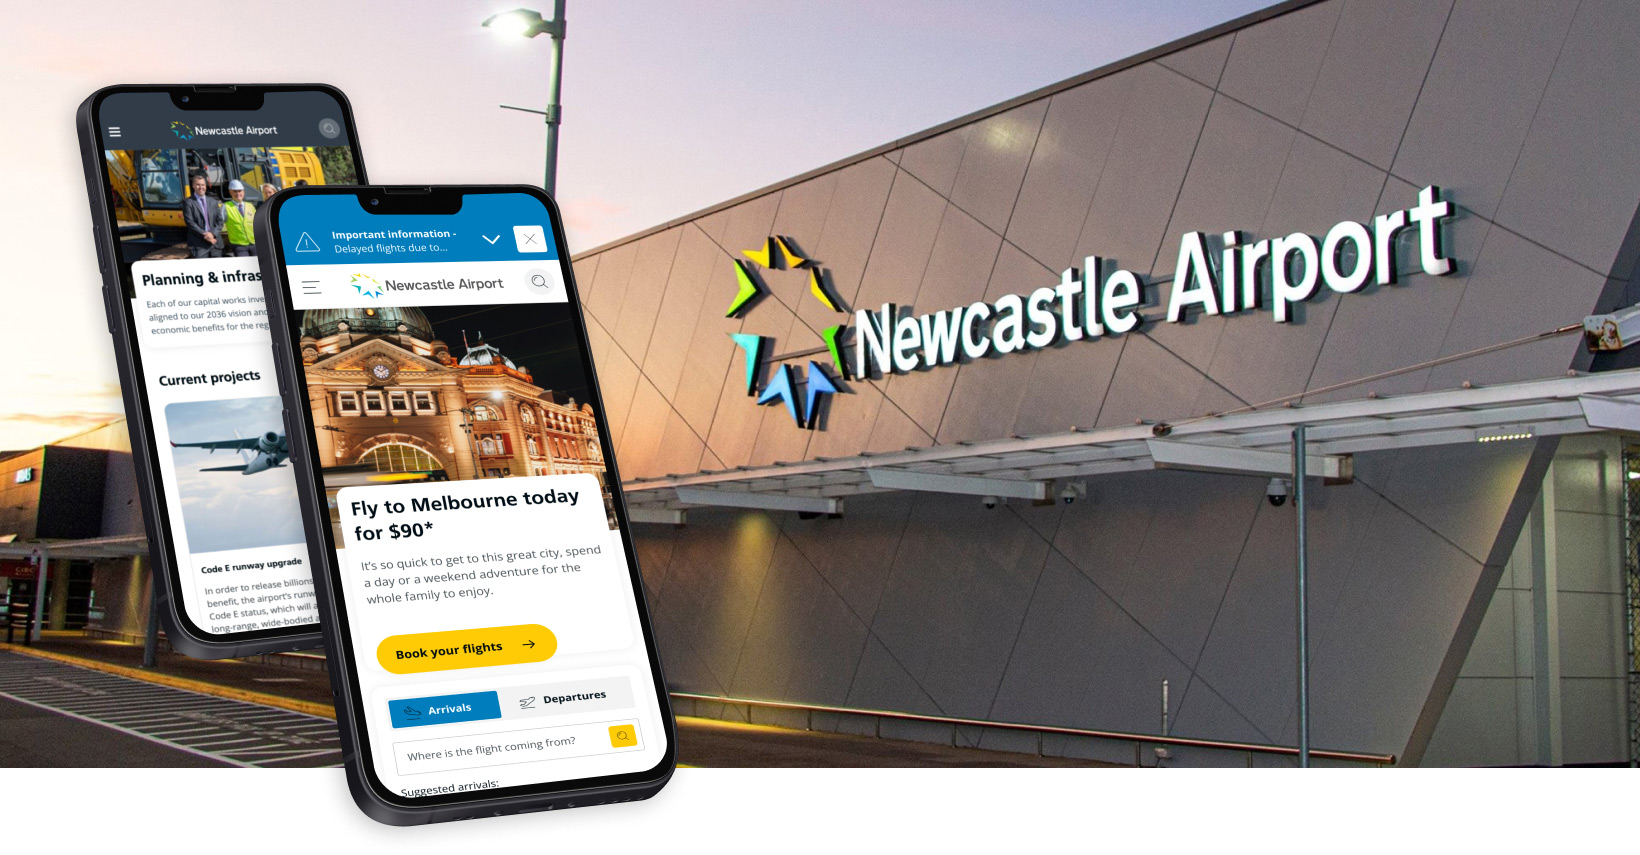 Improving customer experience and growing NSW’s tourism with the Newcastle Airport